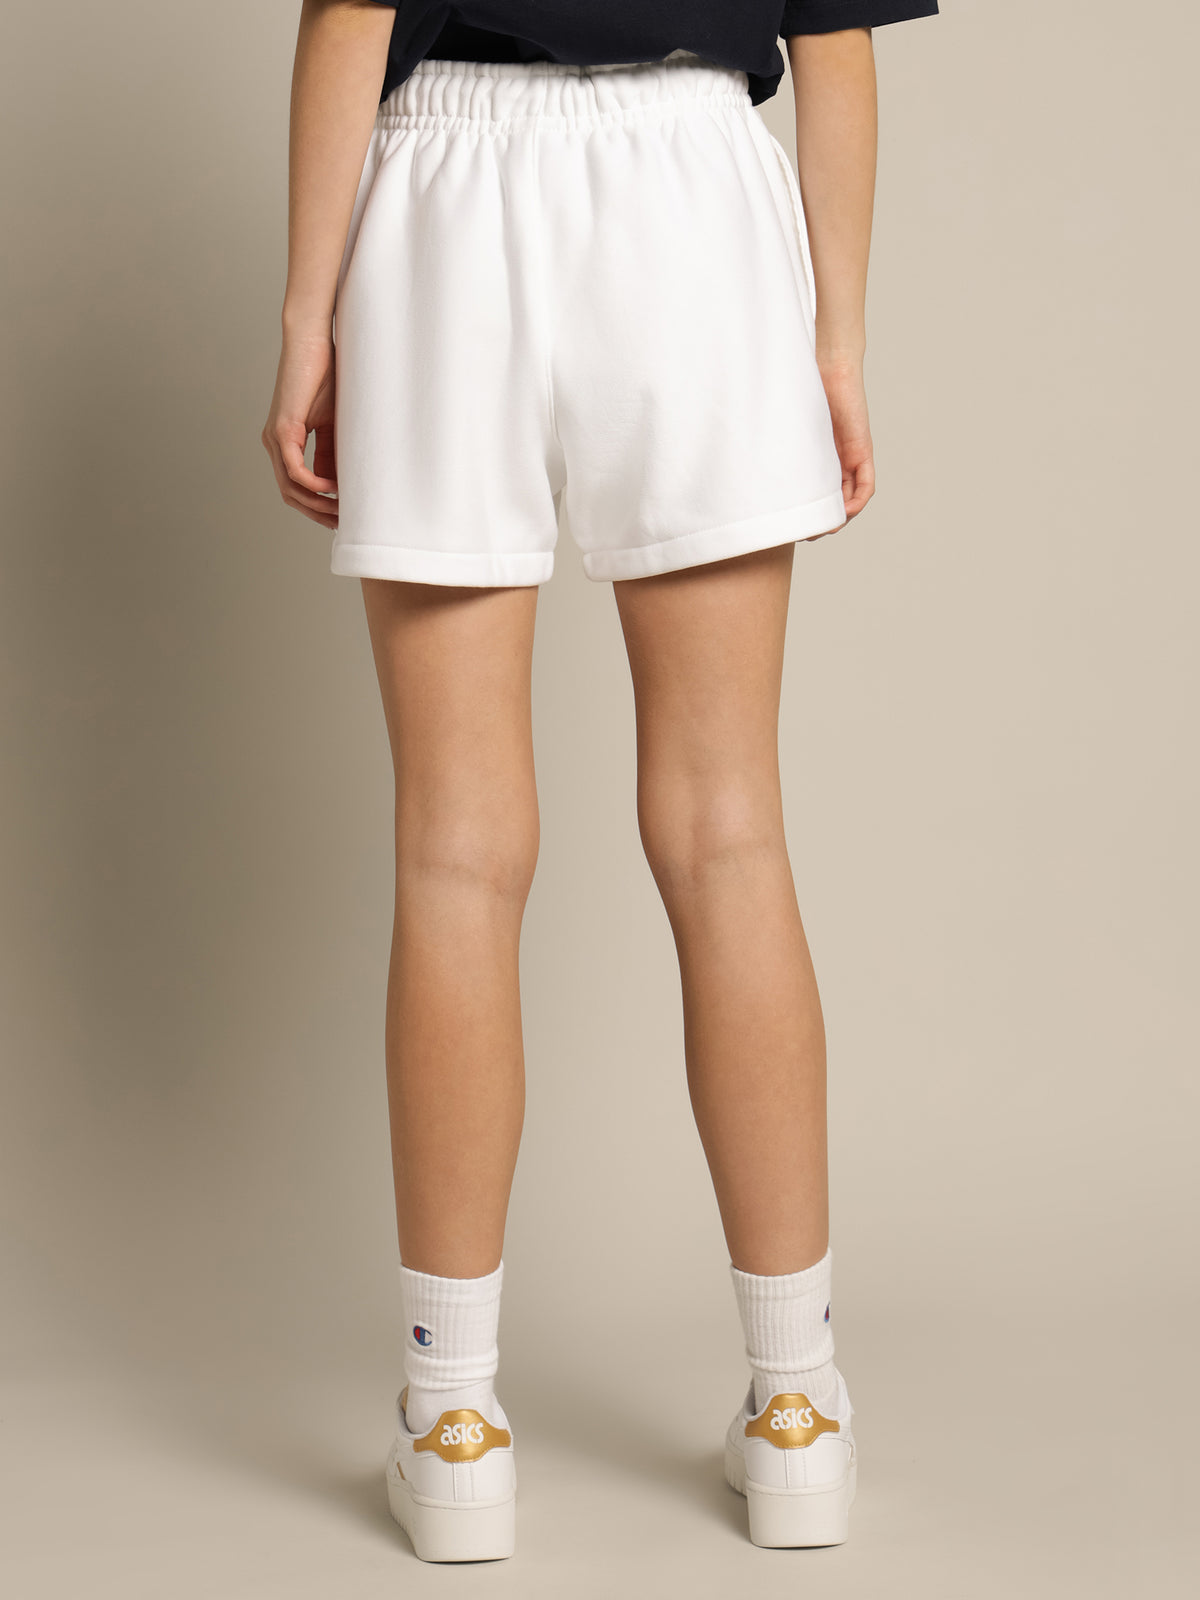 Reverse Weave Shorts in White